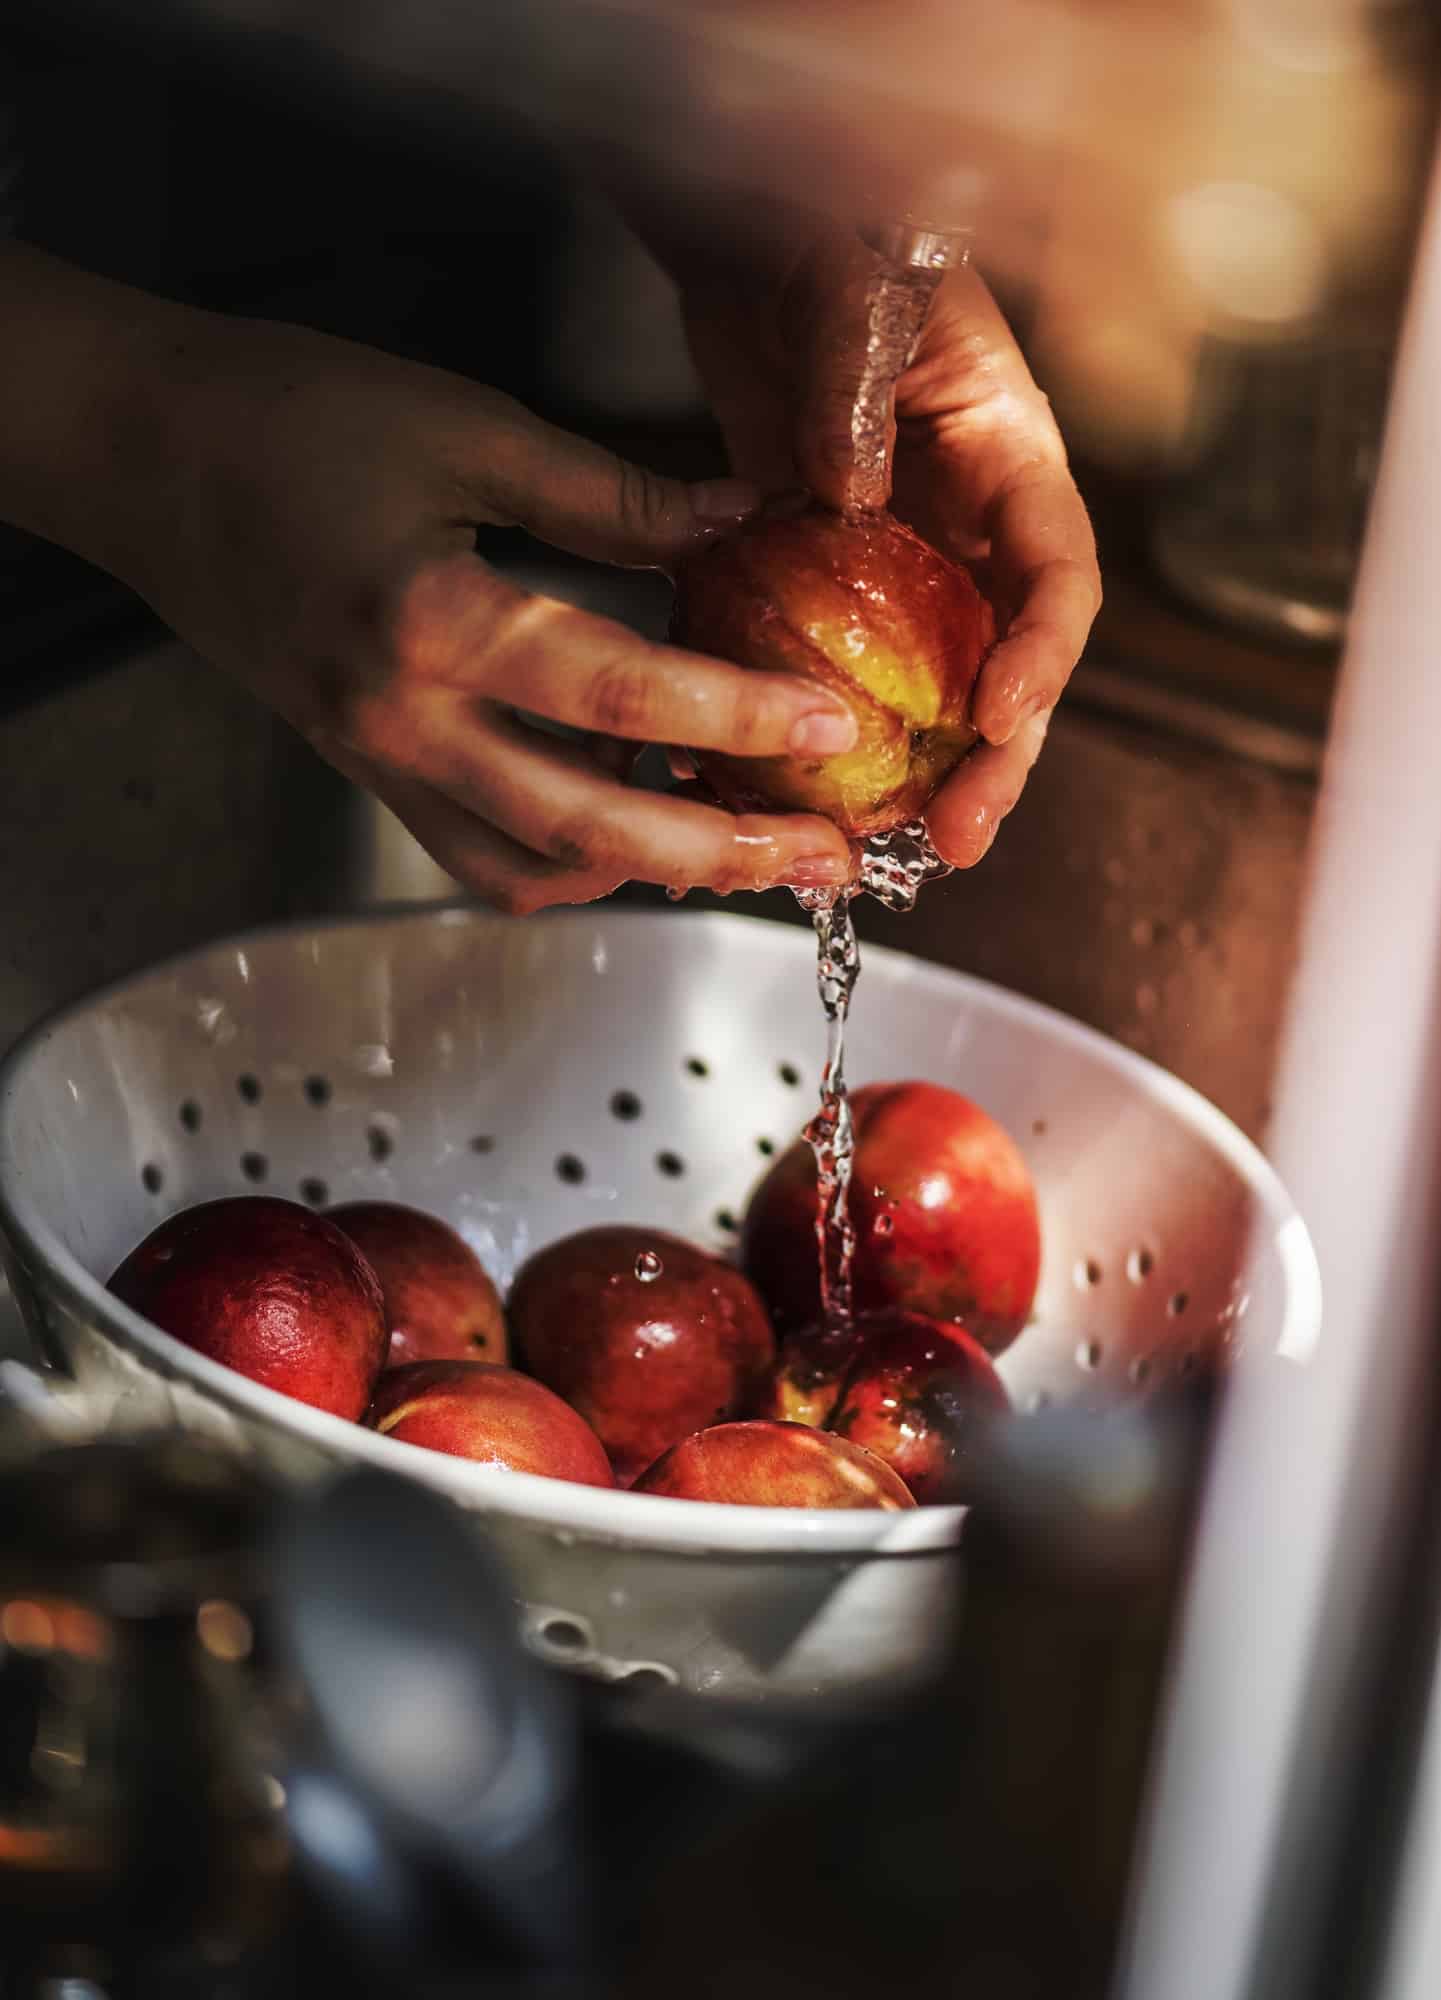 A person washing apples under running water.